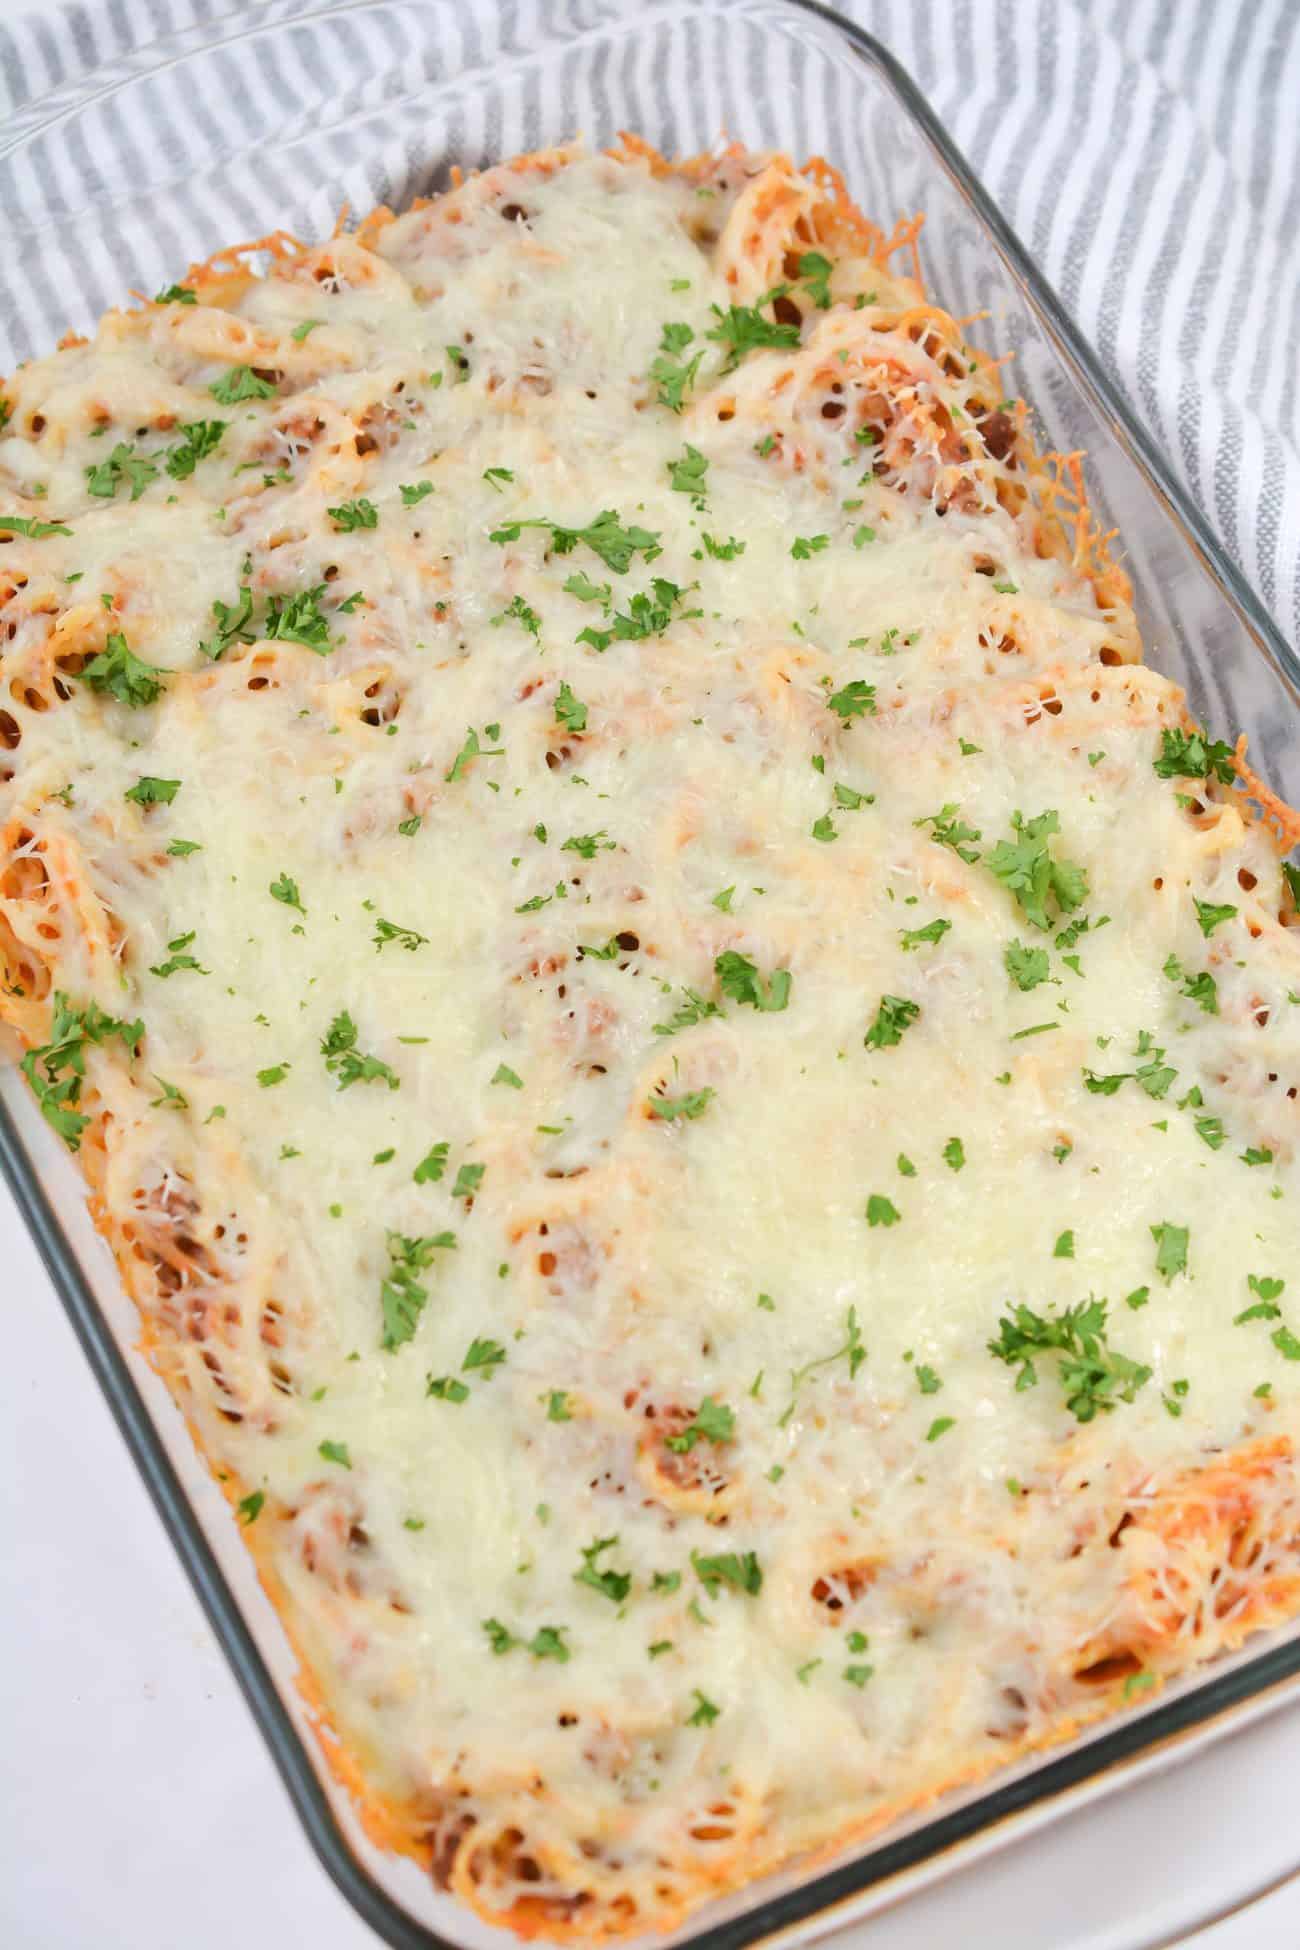 How To Make Baked Spaghetti